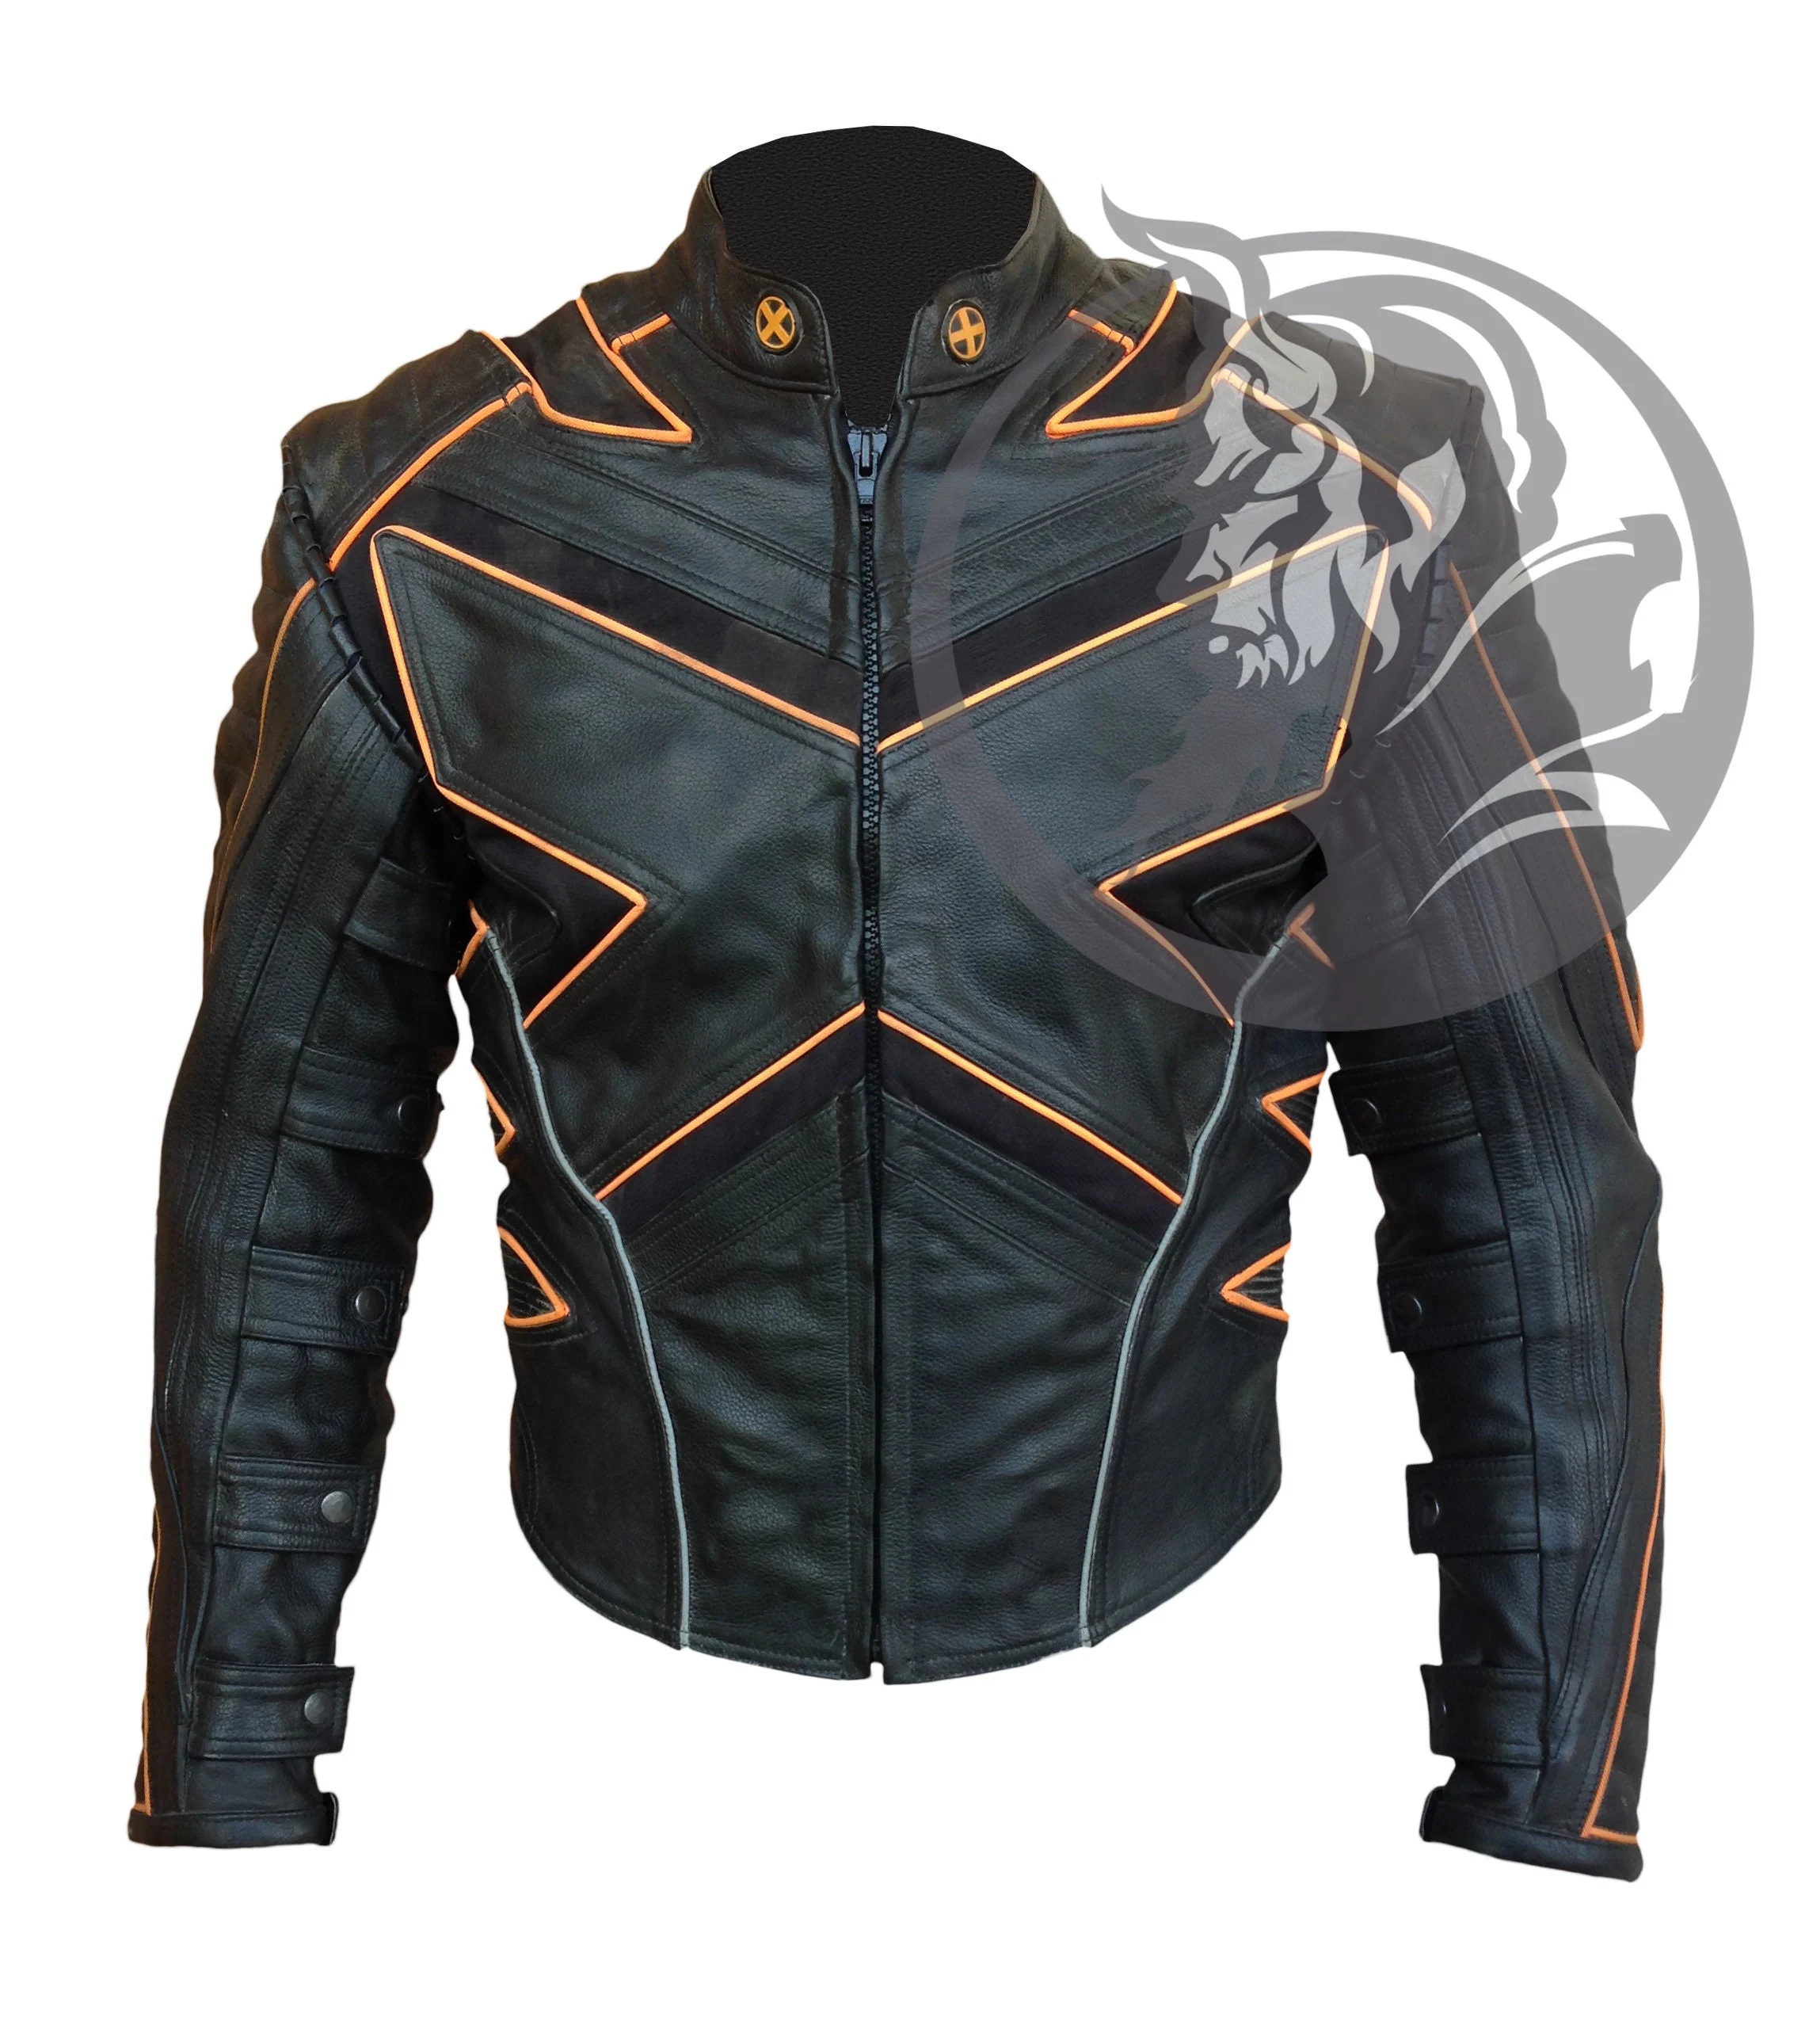 X-Men 3 The Last Stand Leather Jacket